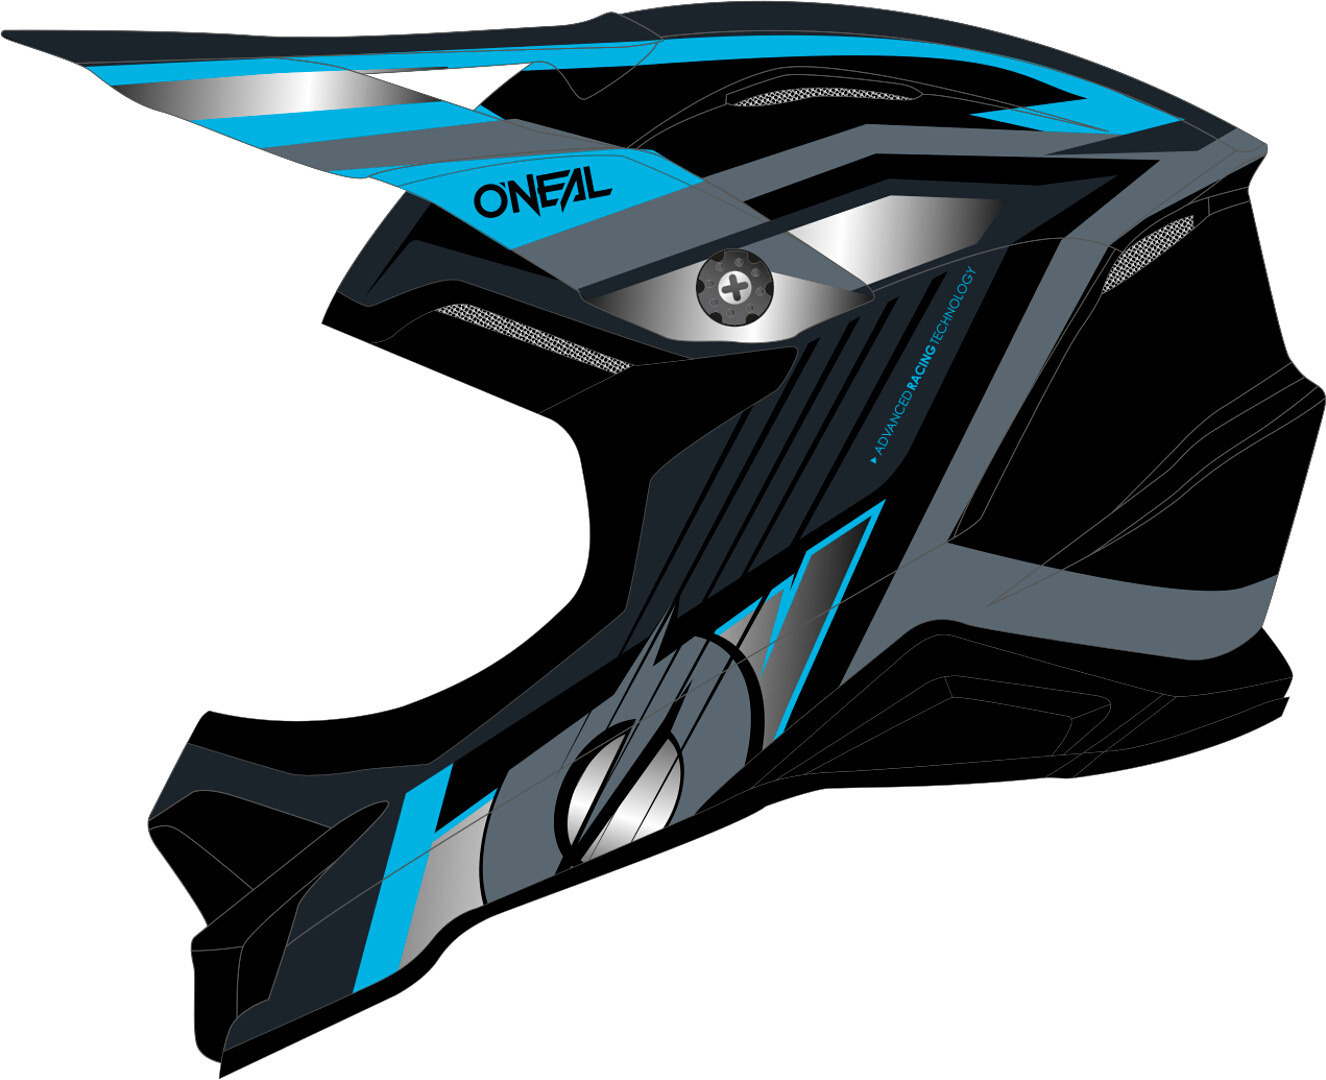 Oneal 3Series Vision, black-grey-blue, Size XS, black-grey-blue, Size XS